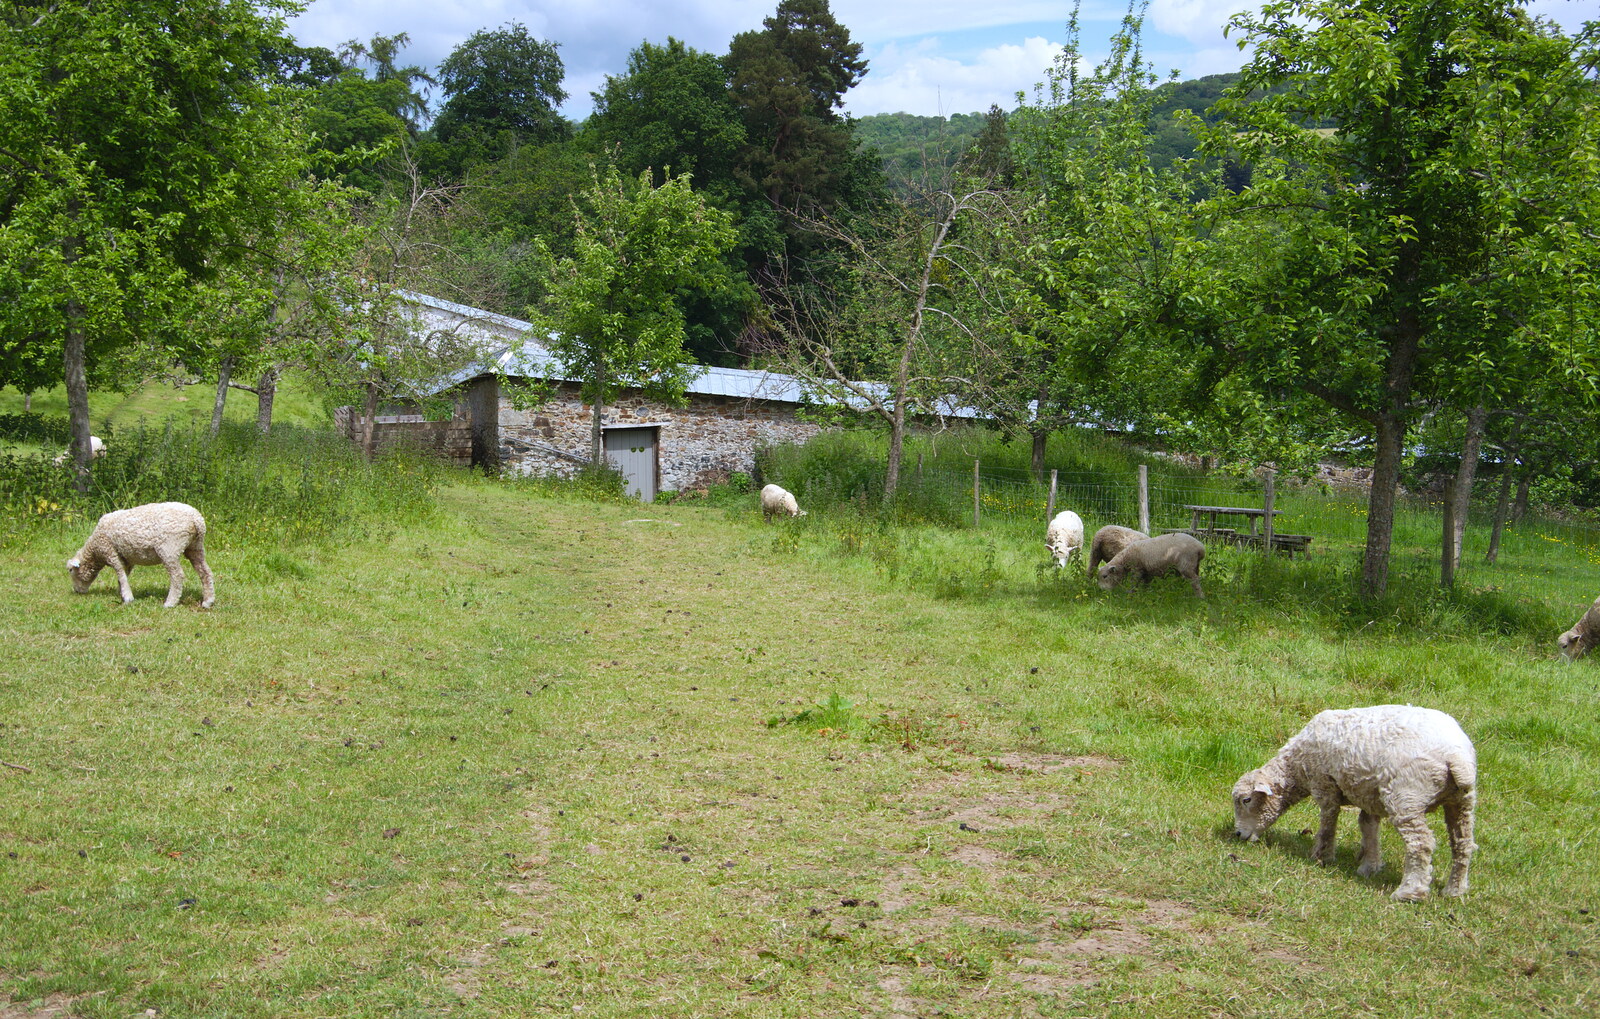 Sheep in a small paddock from Chagford Lido and a Trip to Parke, Bovey Tracey, Devon - 25th May 2019